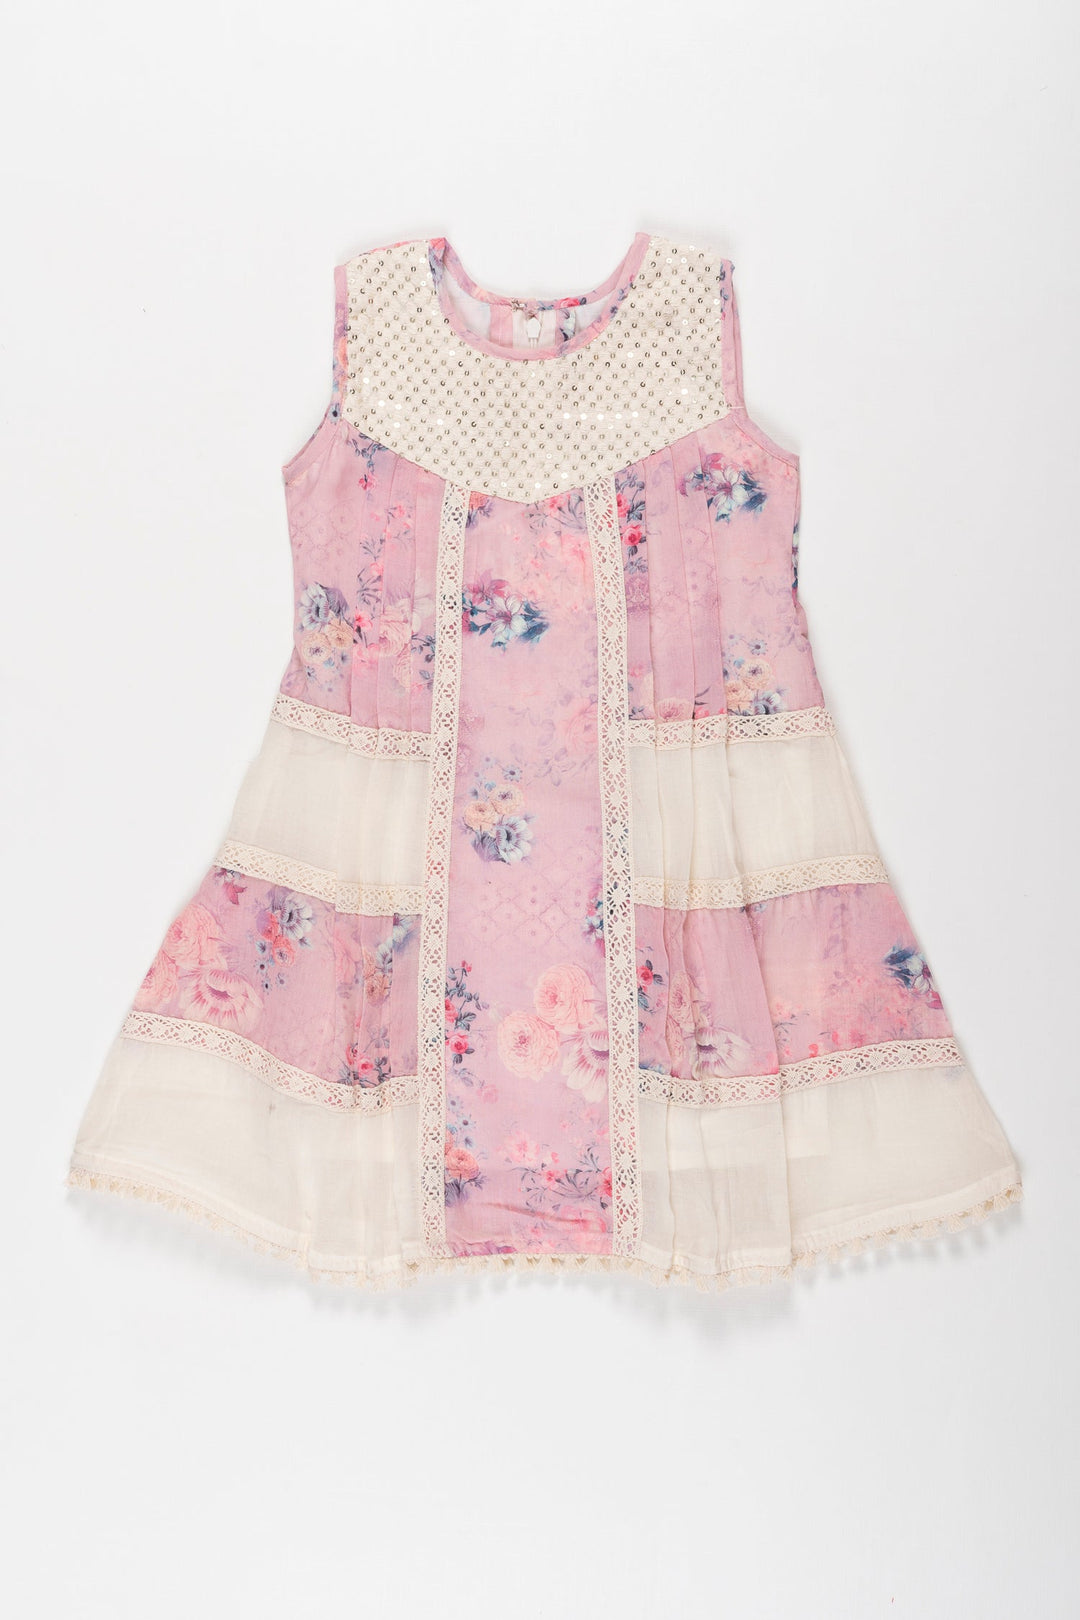 The Nesavu Girls Fancy Frock Enchanted Garden: Girls Airy Cotton Frock with Pastel Floral Design Nesavu 22 (4Y) / Pink / Cotton GFC1290A-22 Buy Pastel Floral Cotton Frock for Girls | Perfect for Summer Elegance | The Nesavu